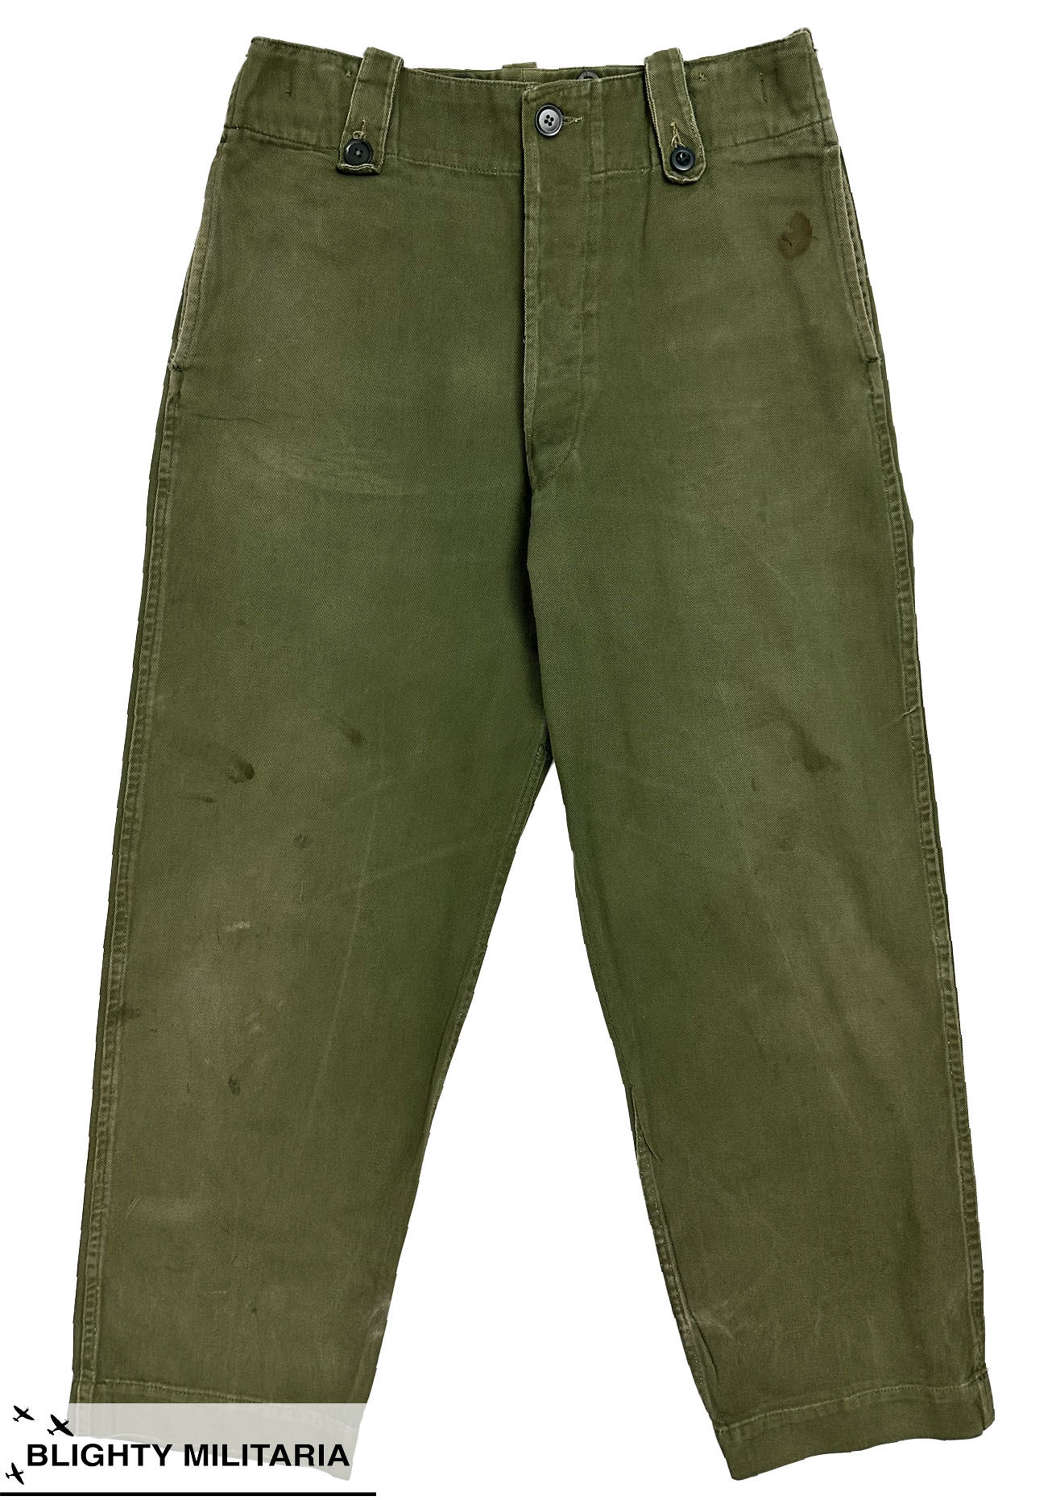 Original 1960s British Overall Green Trousers - Size 2 32x28